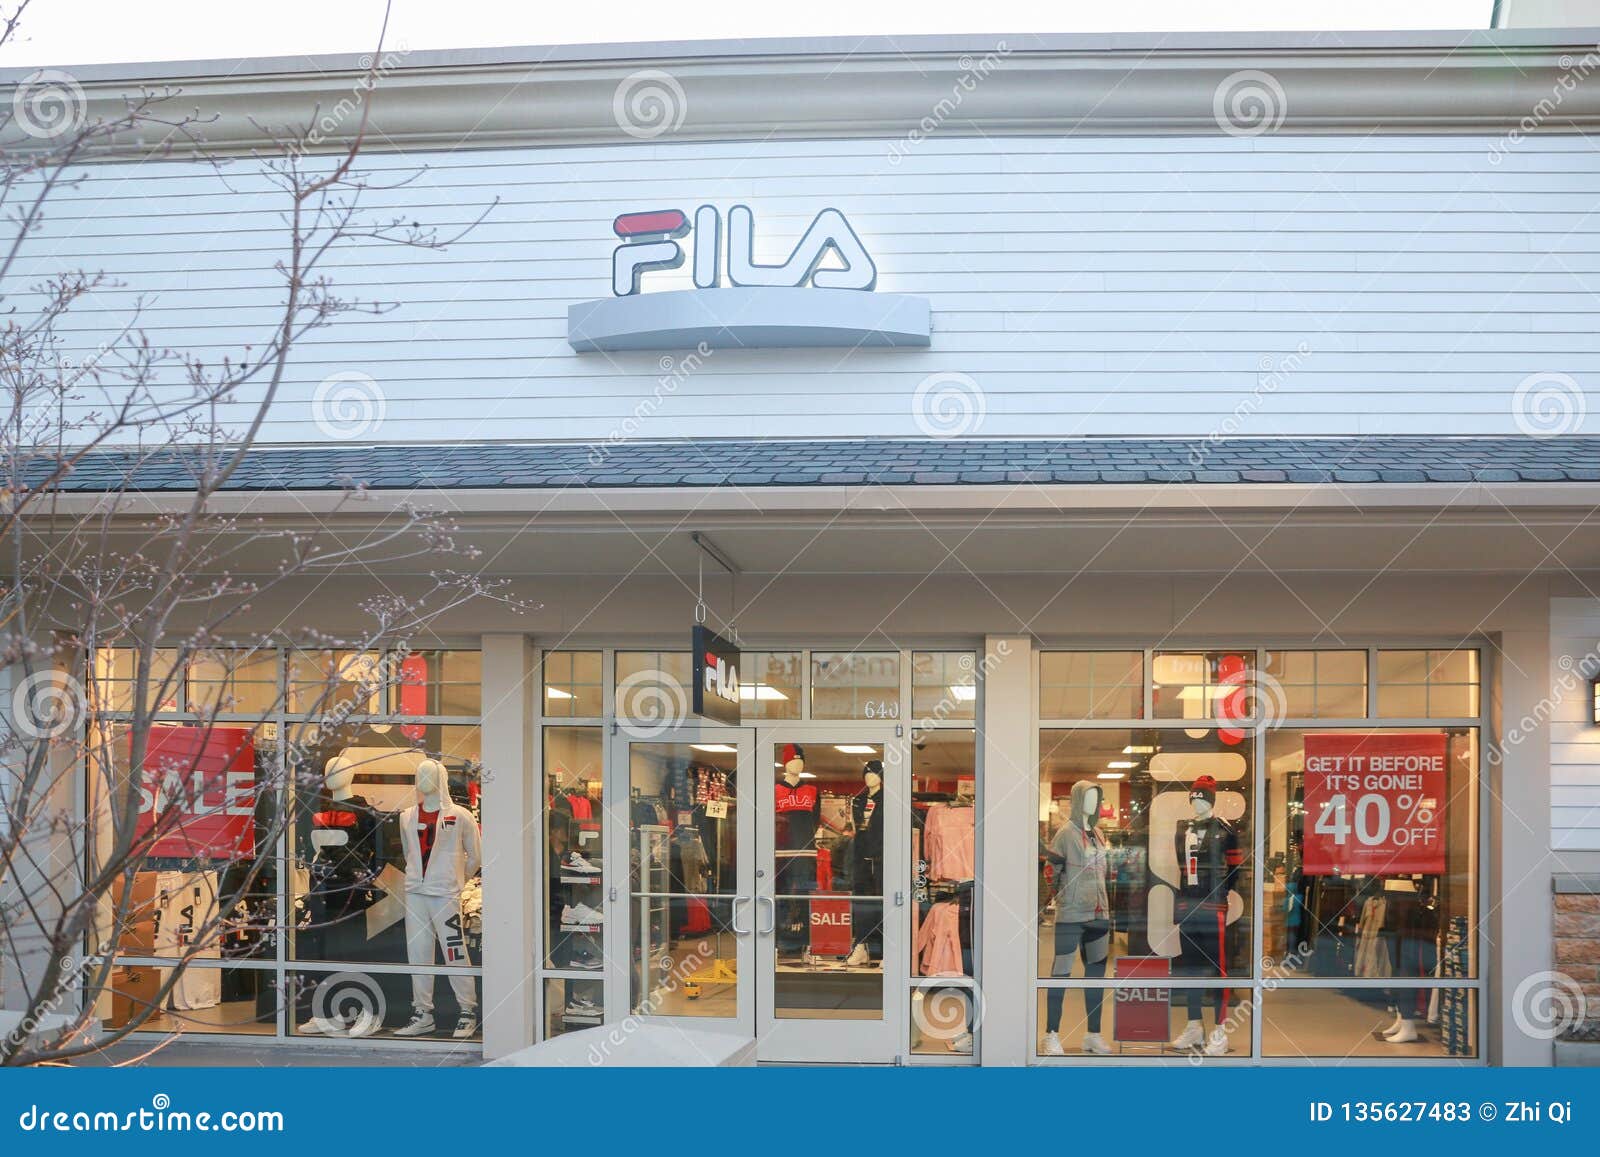 FILA shop in New Jersey editorial Image modern 135627483